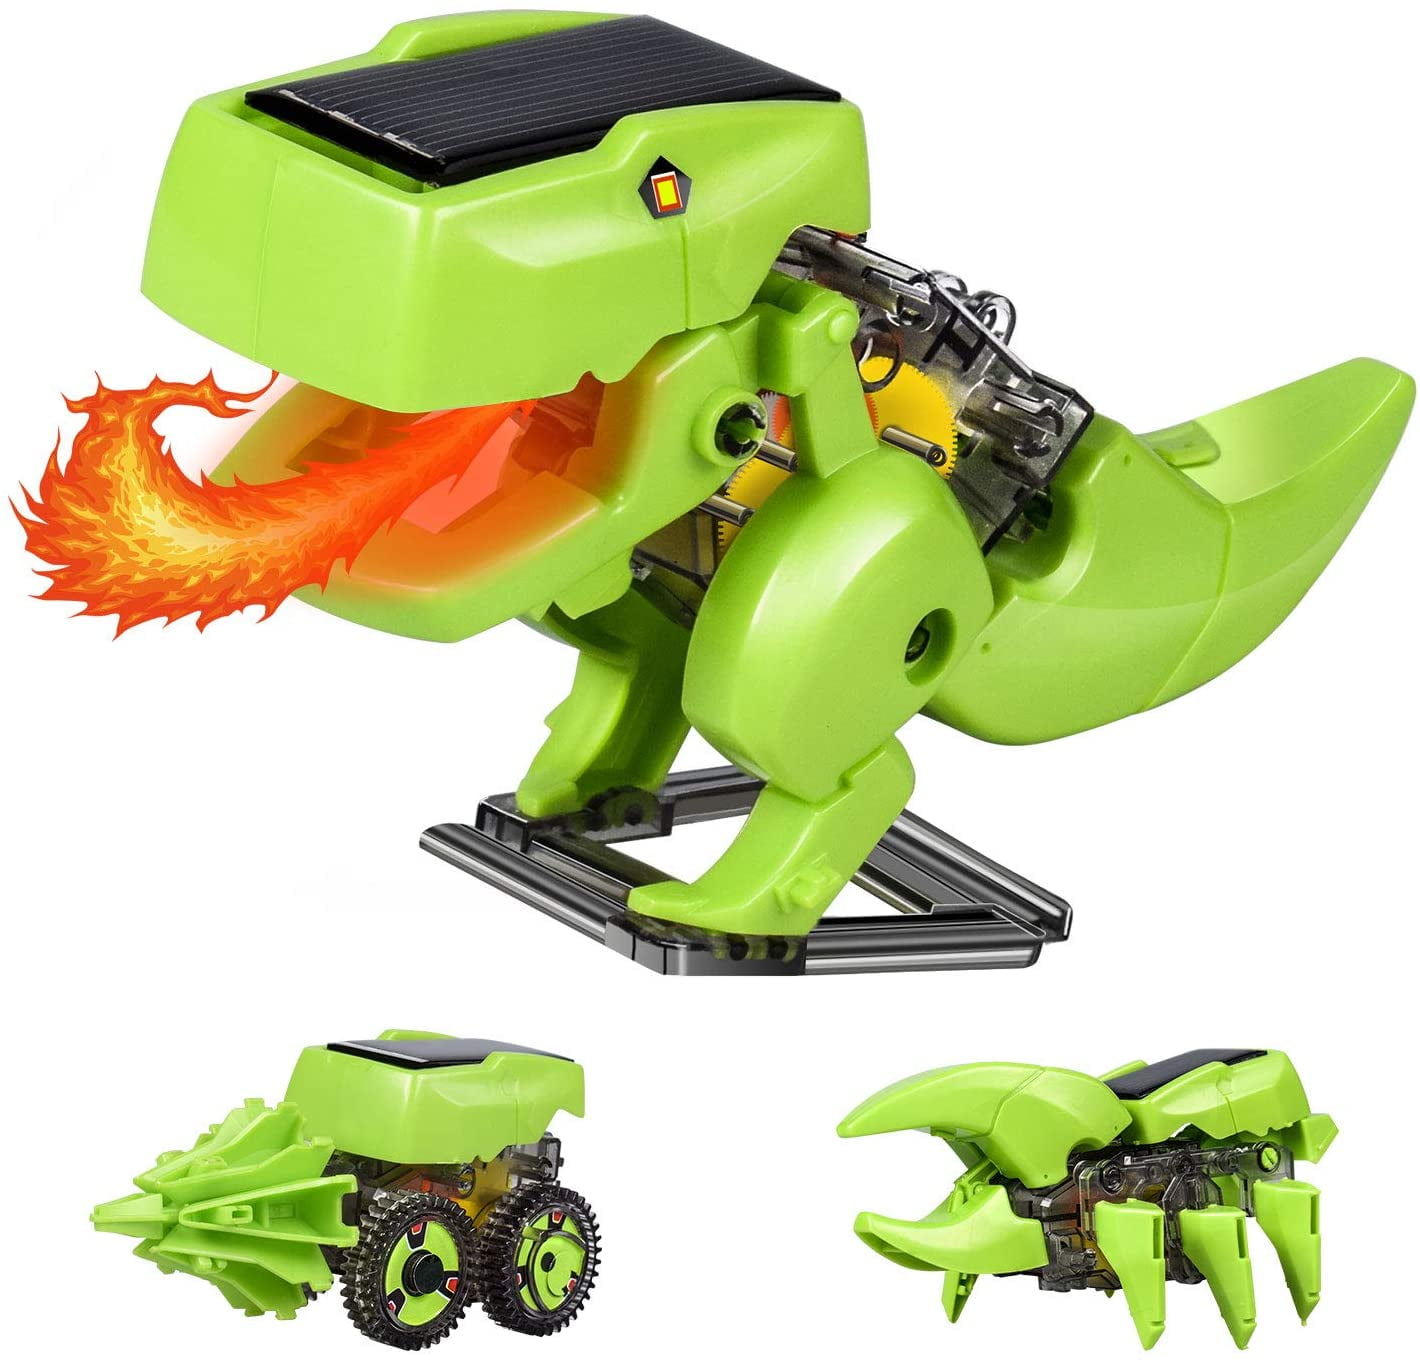 Dinosaur Robot Drill Vehicle Insecta DIY Assembly Model Solar Robot Transformation Toy 4 in 1